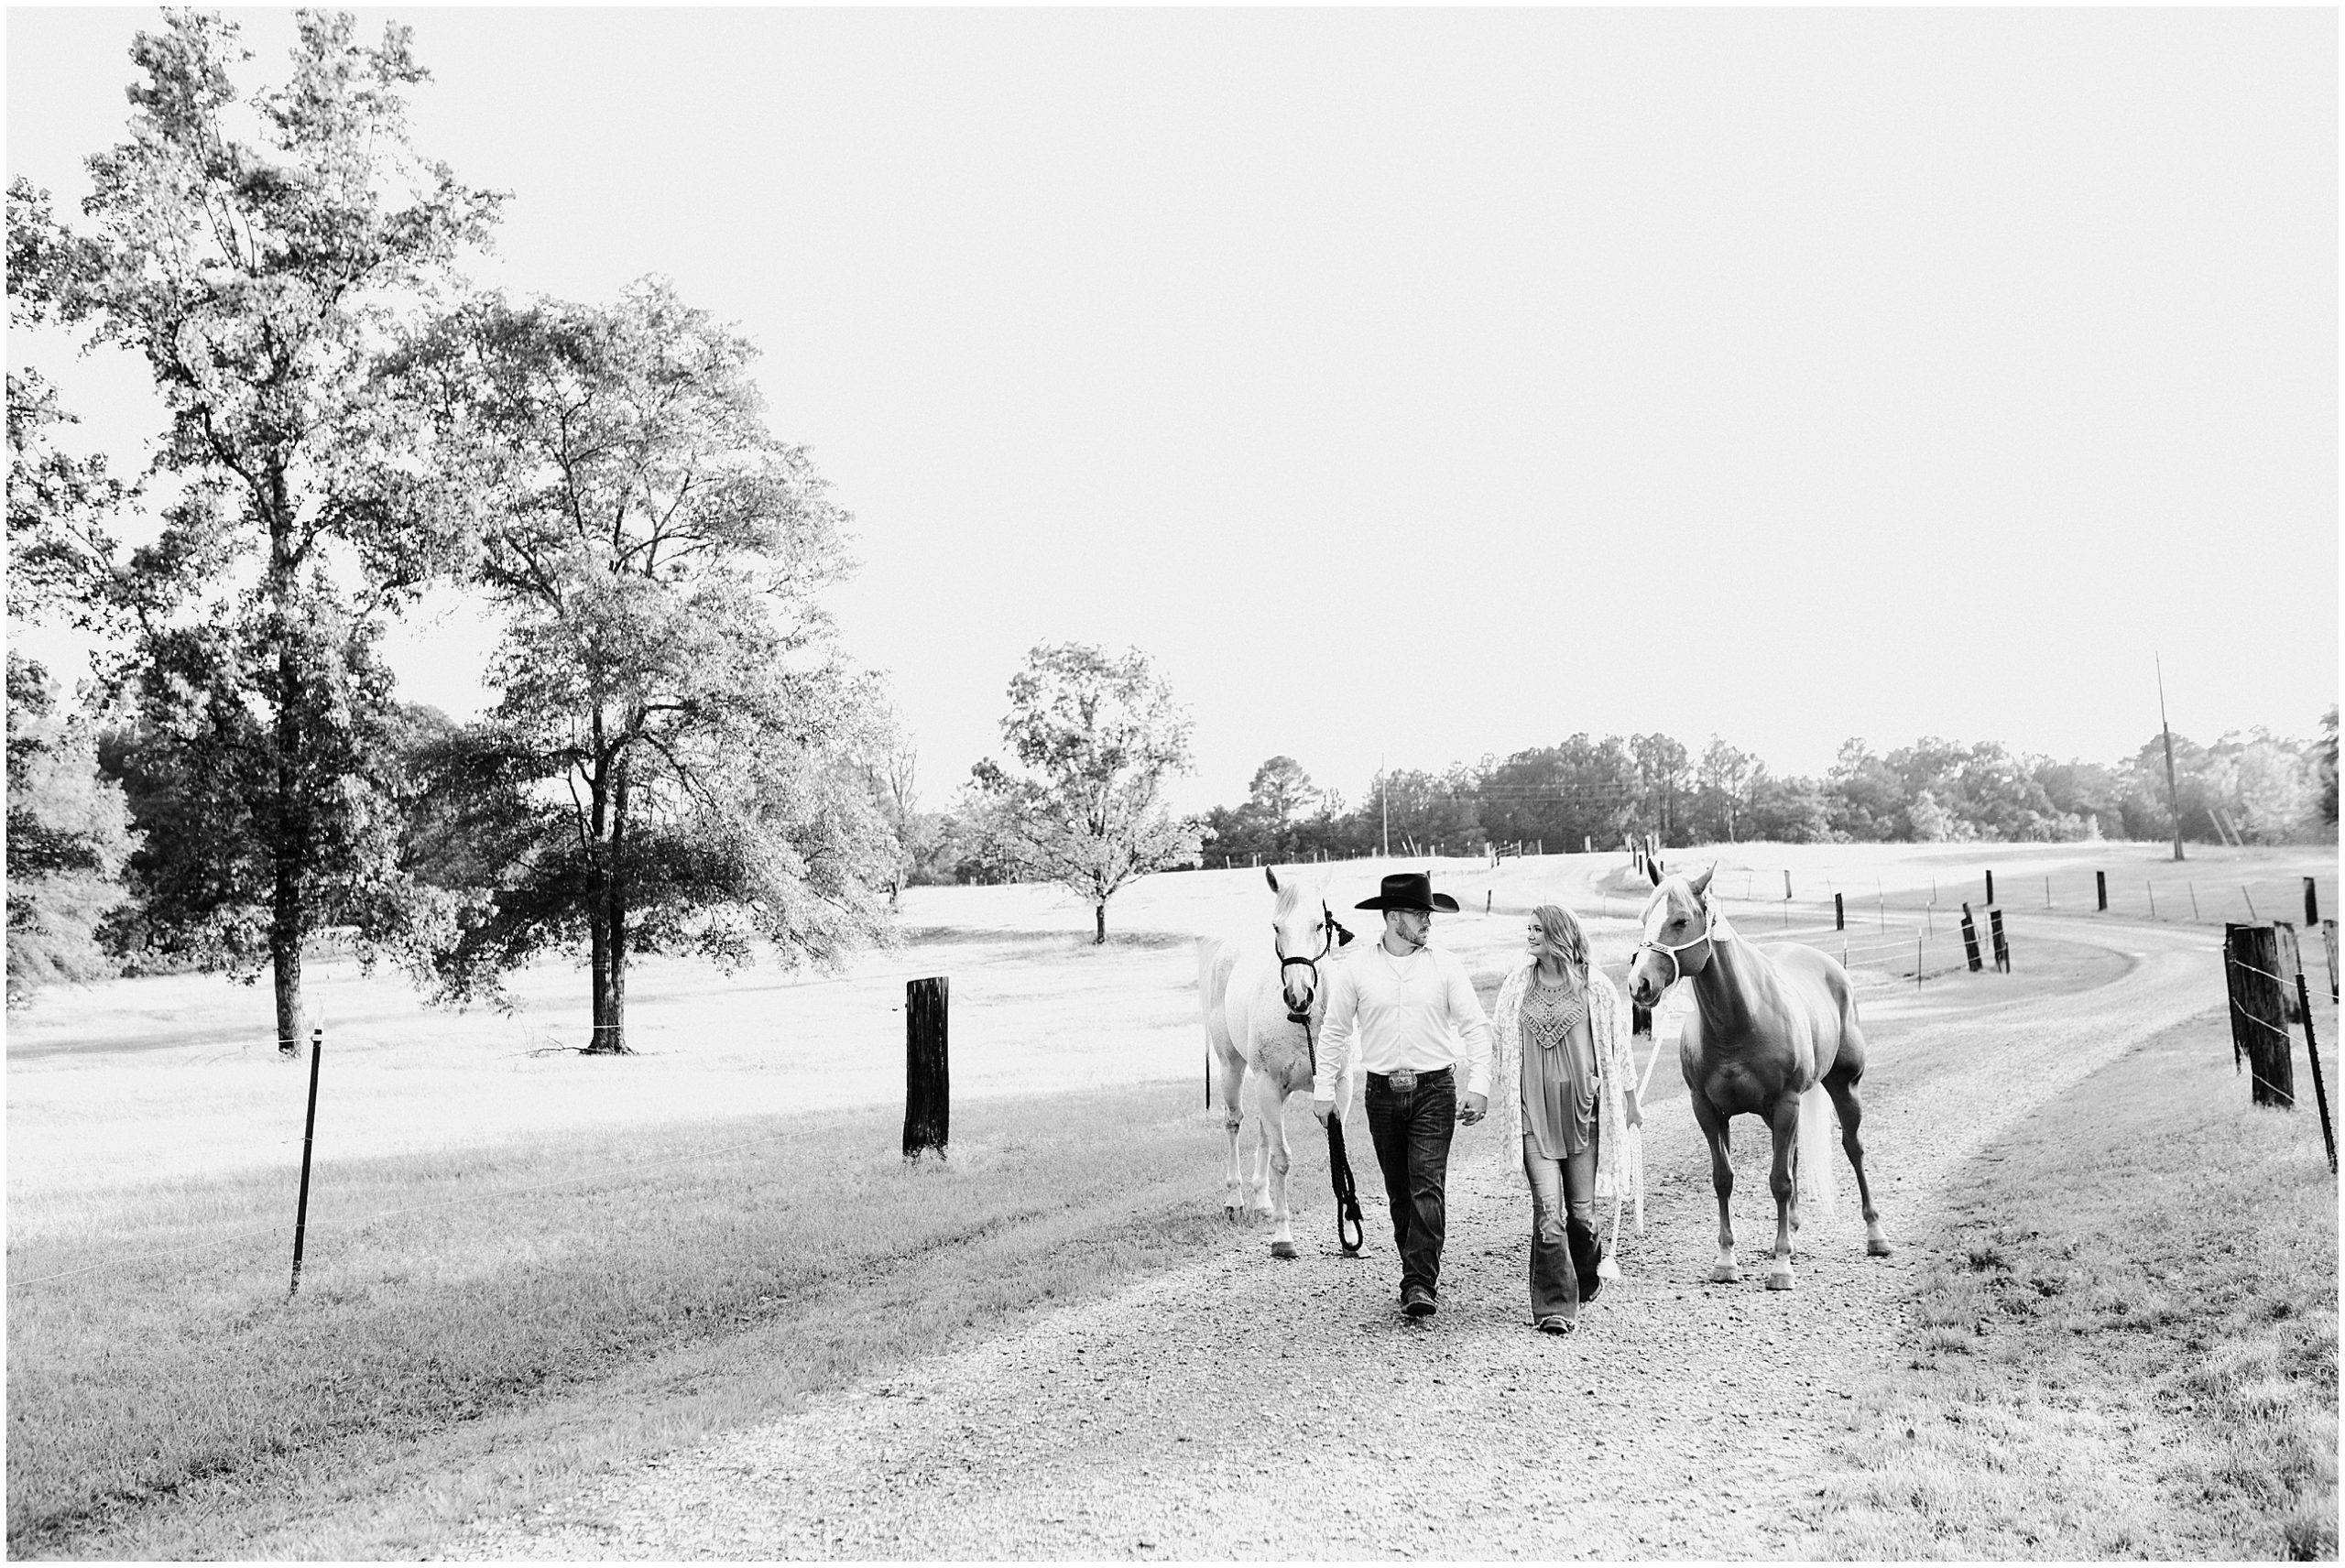 engagement session with horses in south carolina